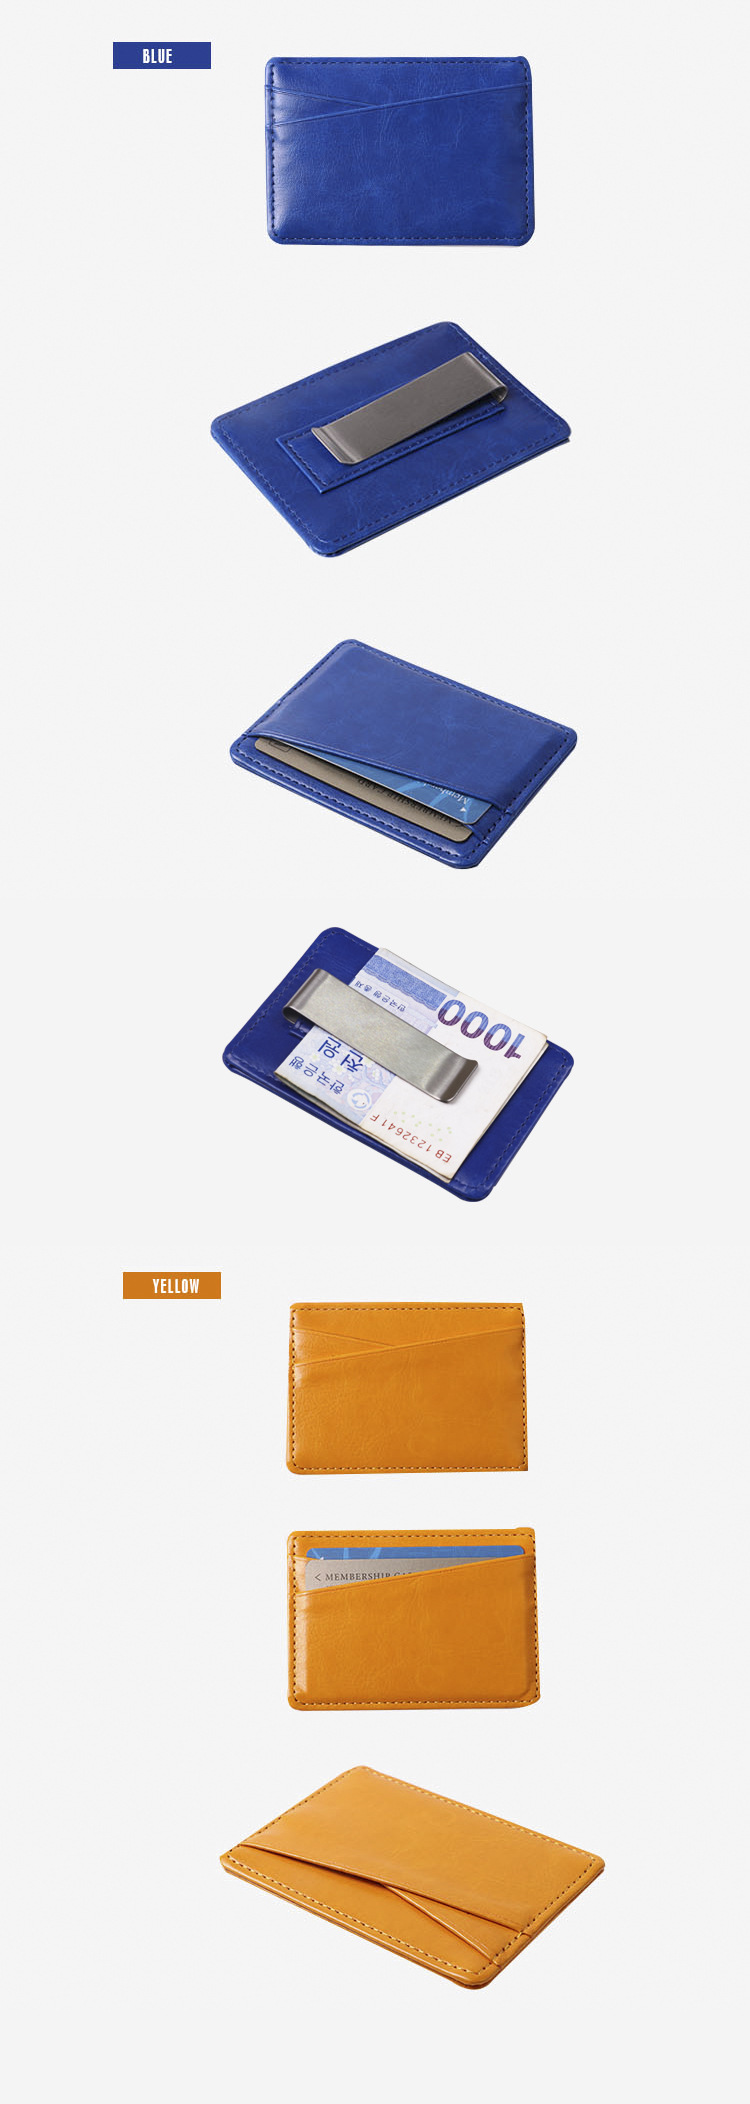 Korean new fashion leather bank card storage gift ID card holderpicture7